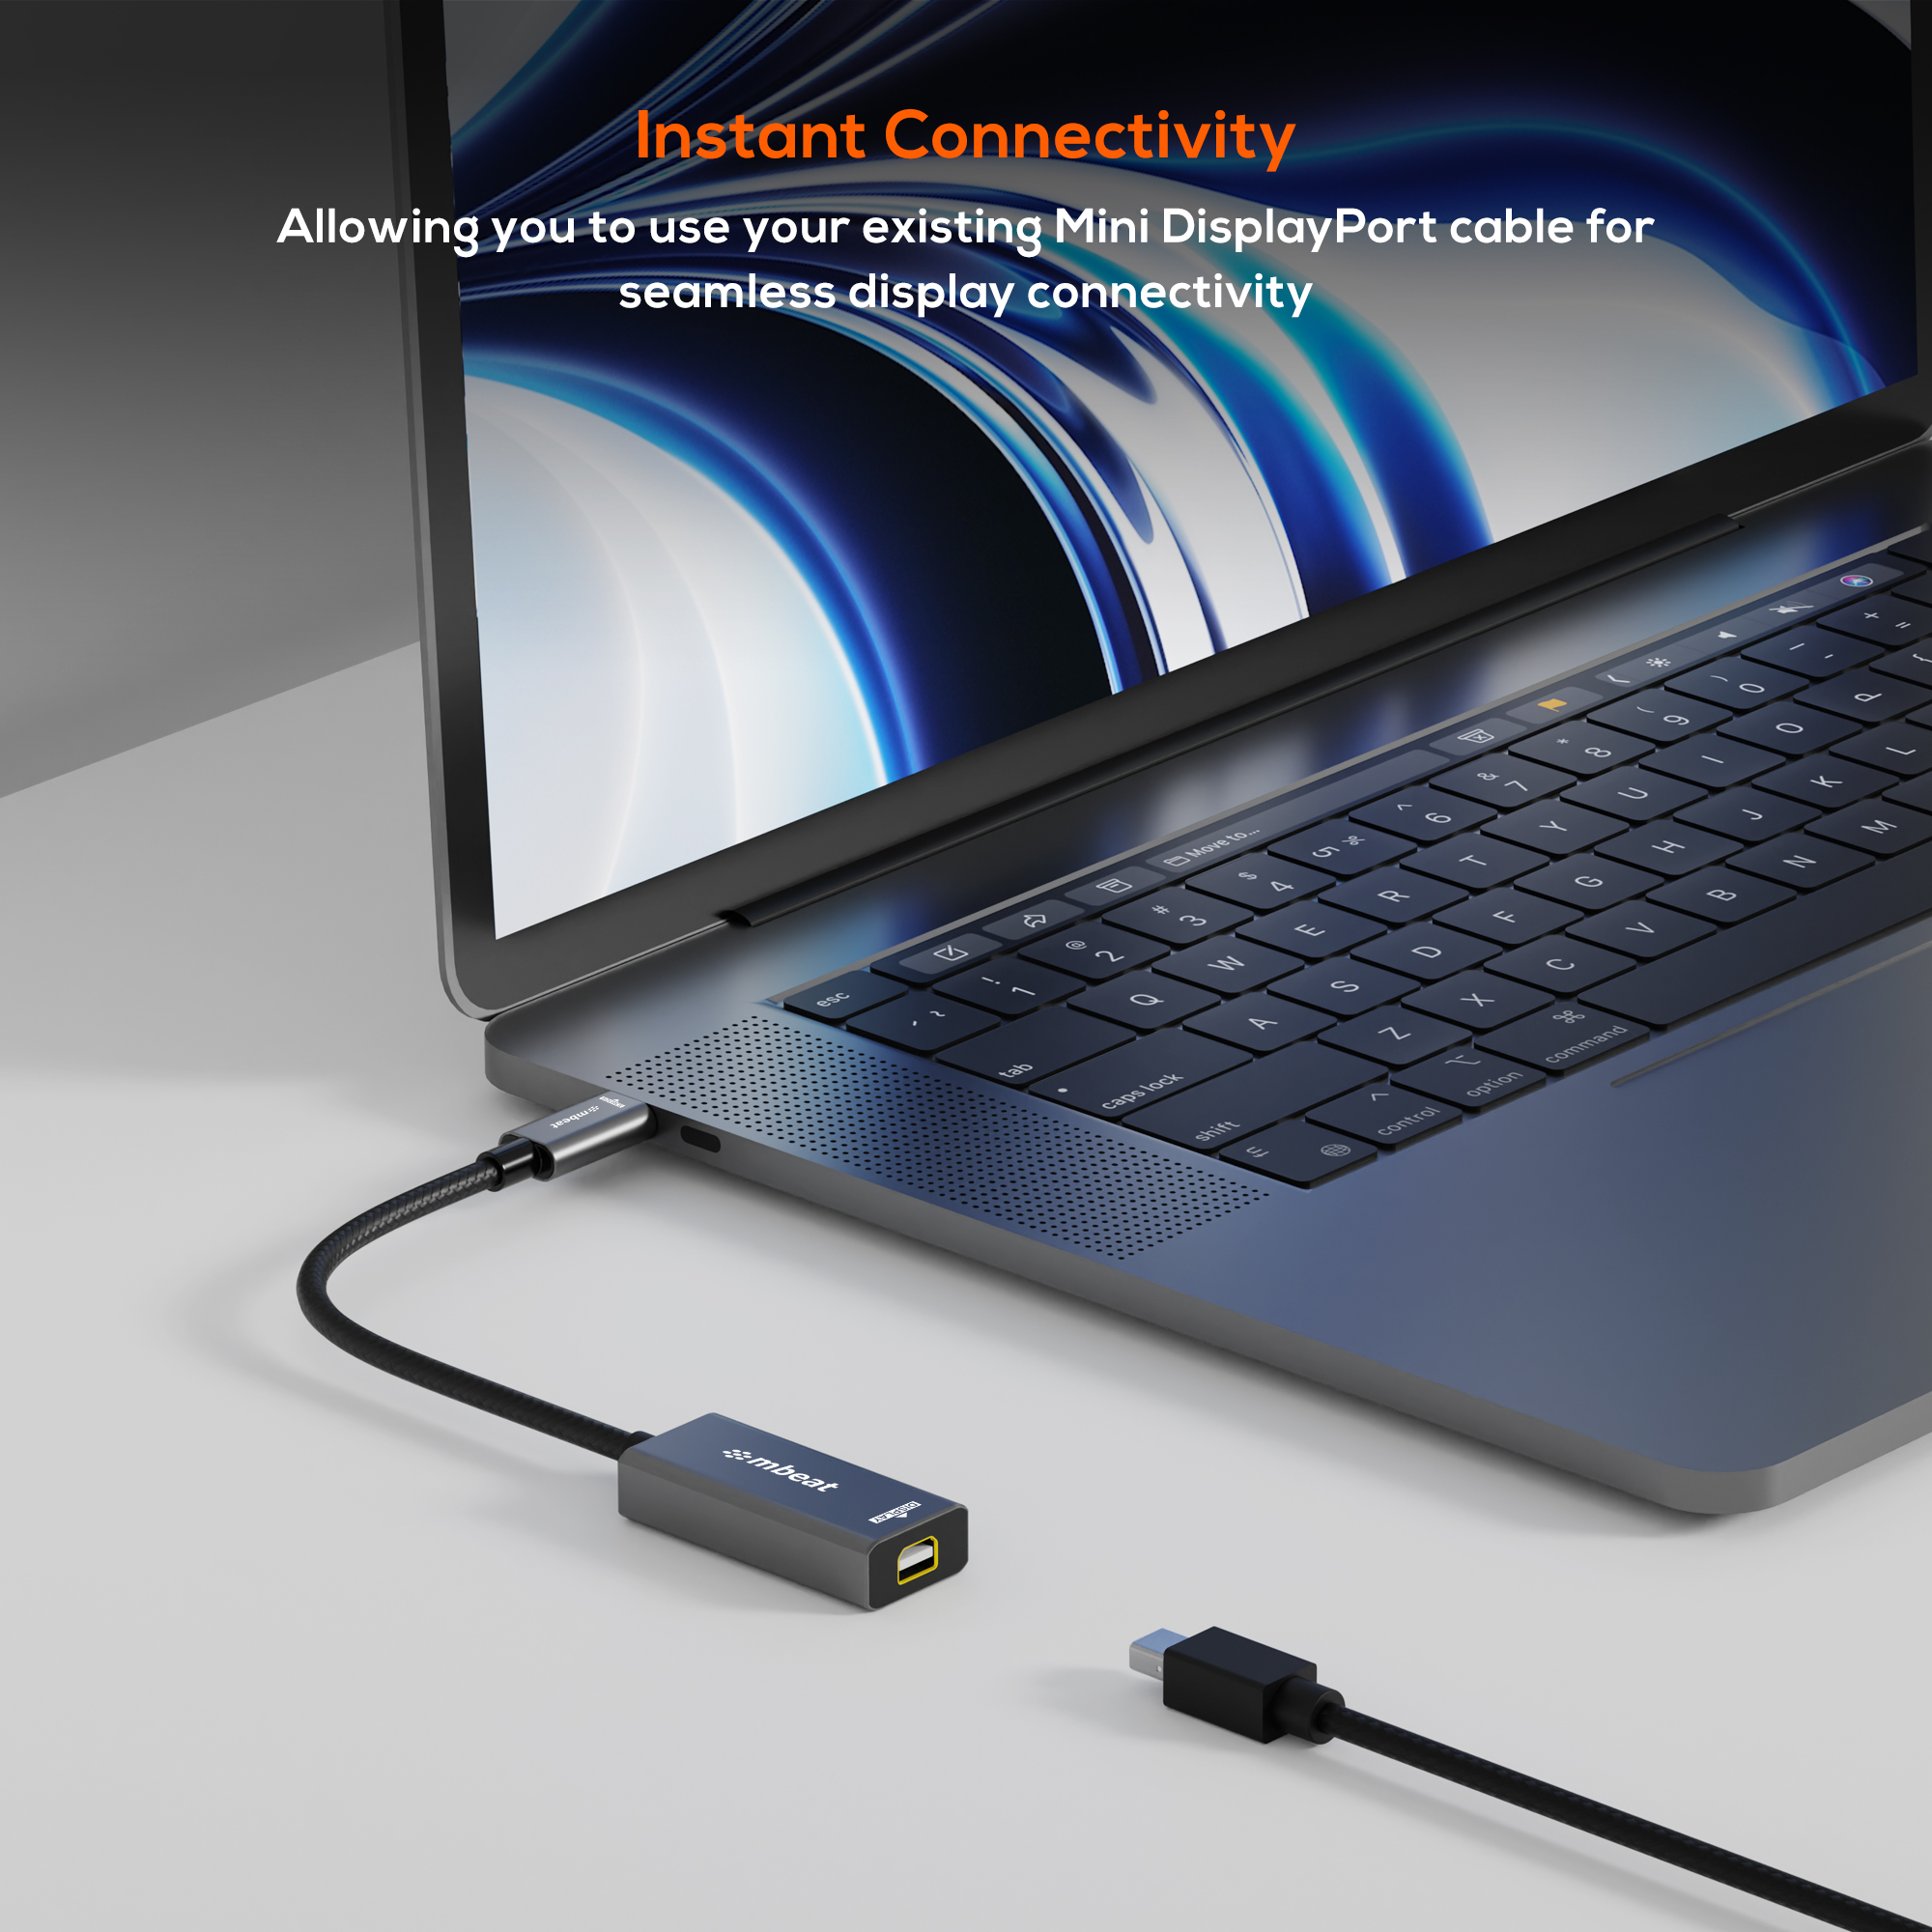 A large marketing image providing additional information about the product mbeat Tough Link USB-C to Mini DisplayPort Adapter - Additional alt info not provided